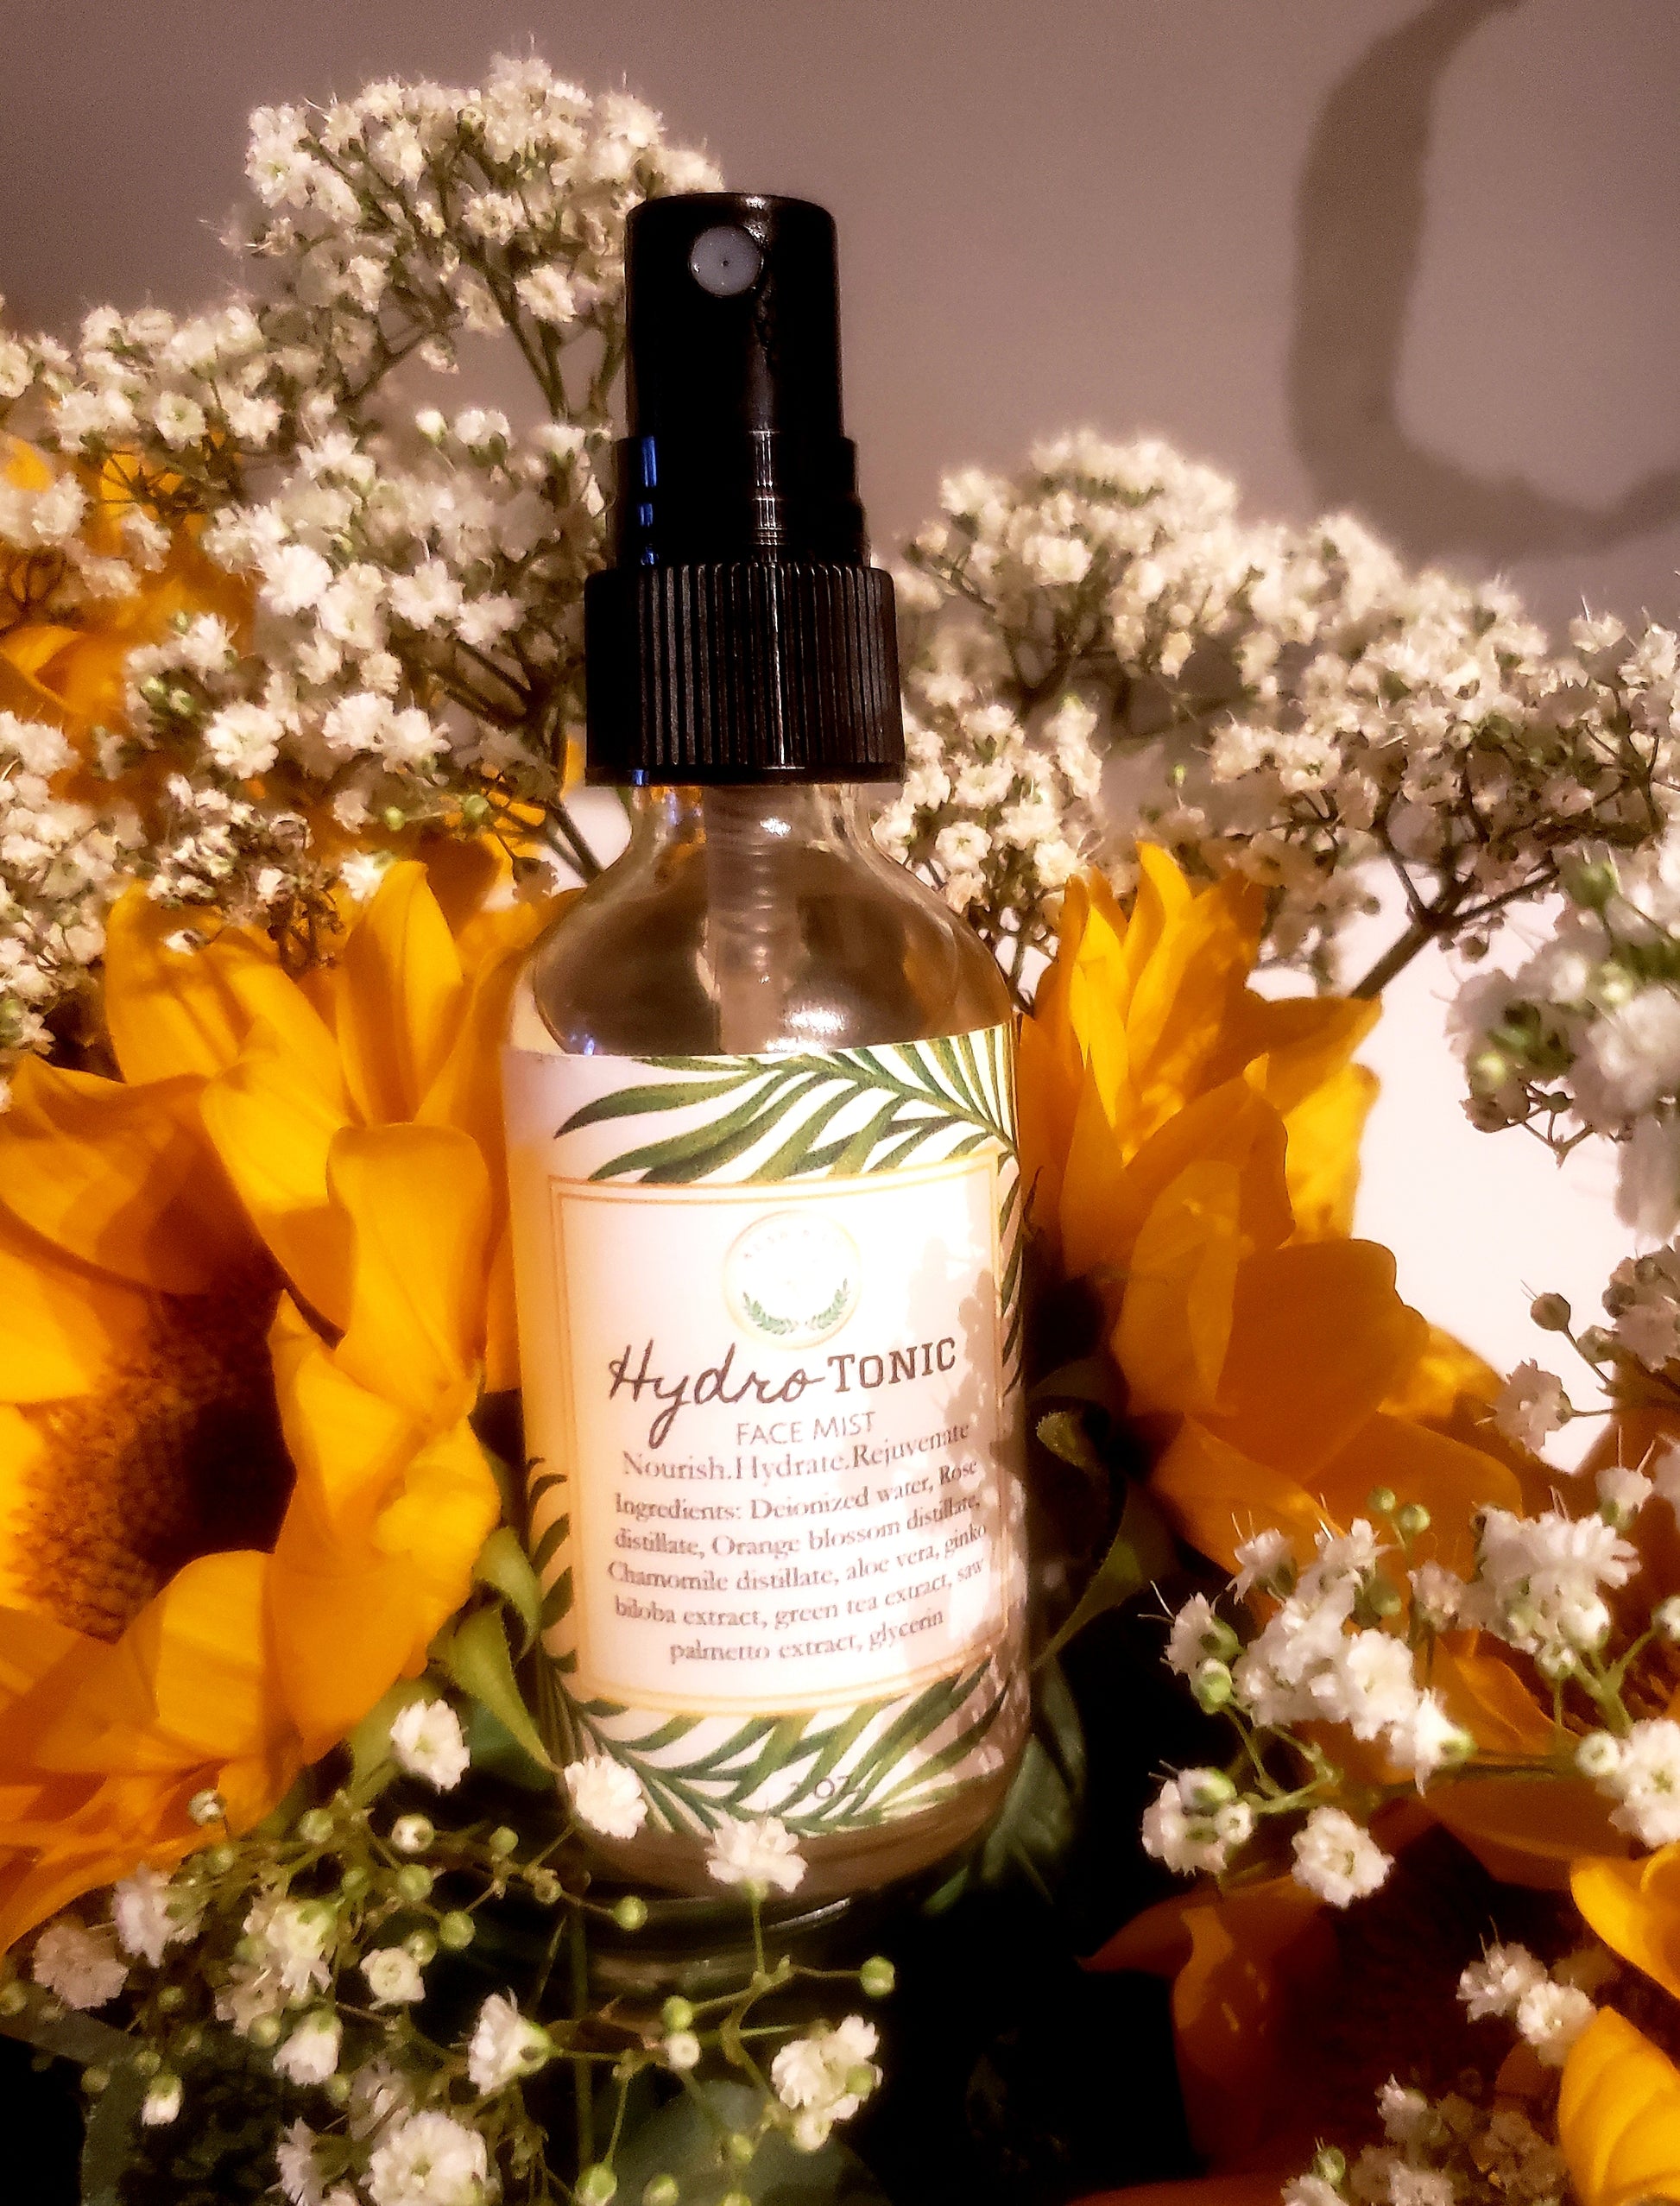 https://kushncoessentials.com/products/hydro-tonic-face-mist